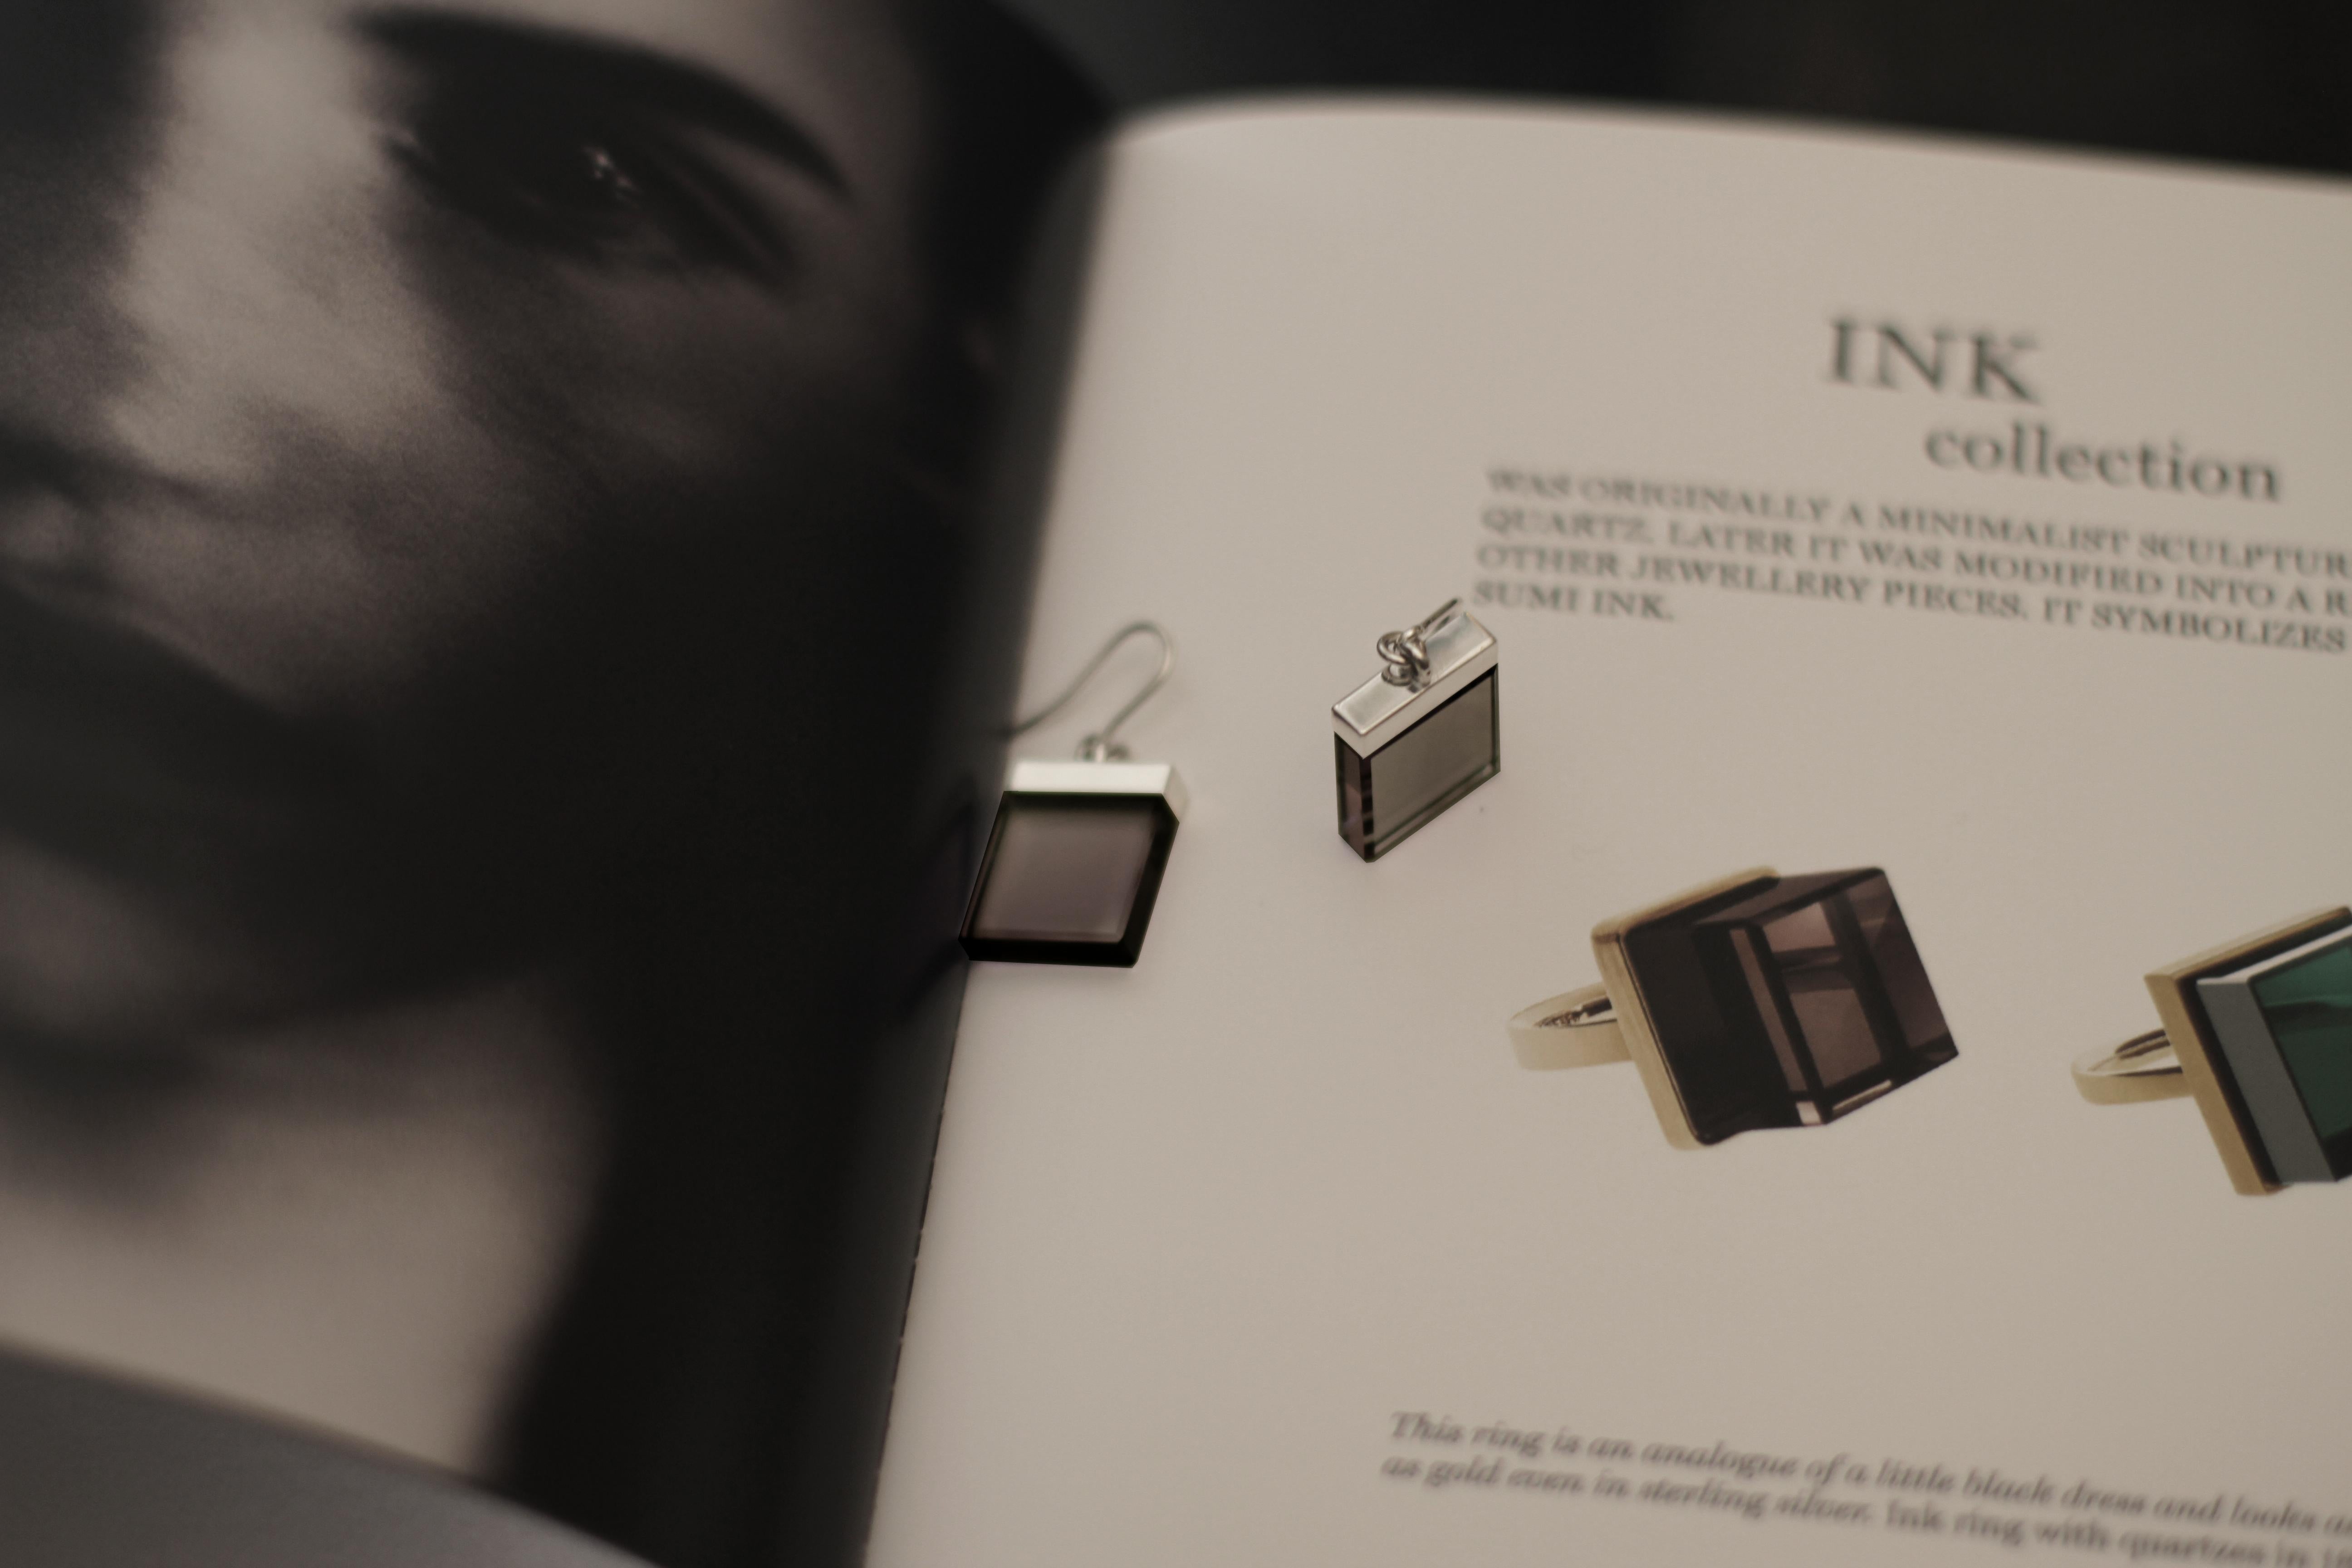 This contemporary jewellery collection was featured in Harper's Bazaar UA and Vogue UA published issues. 

The earrings are in sterling silver with 15x15x3 mm size natural transparent tender smoky quartzes, which look delicate and sparkly. 

Ink